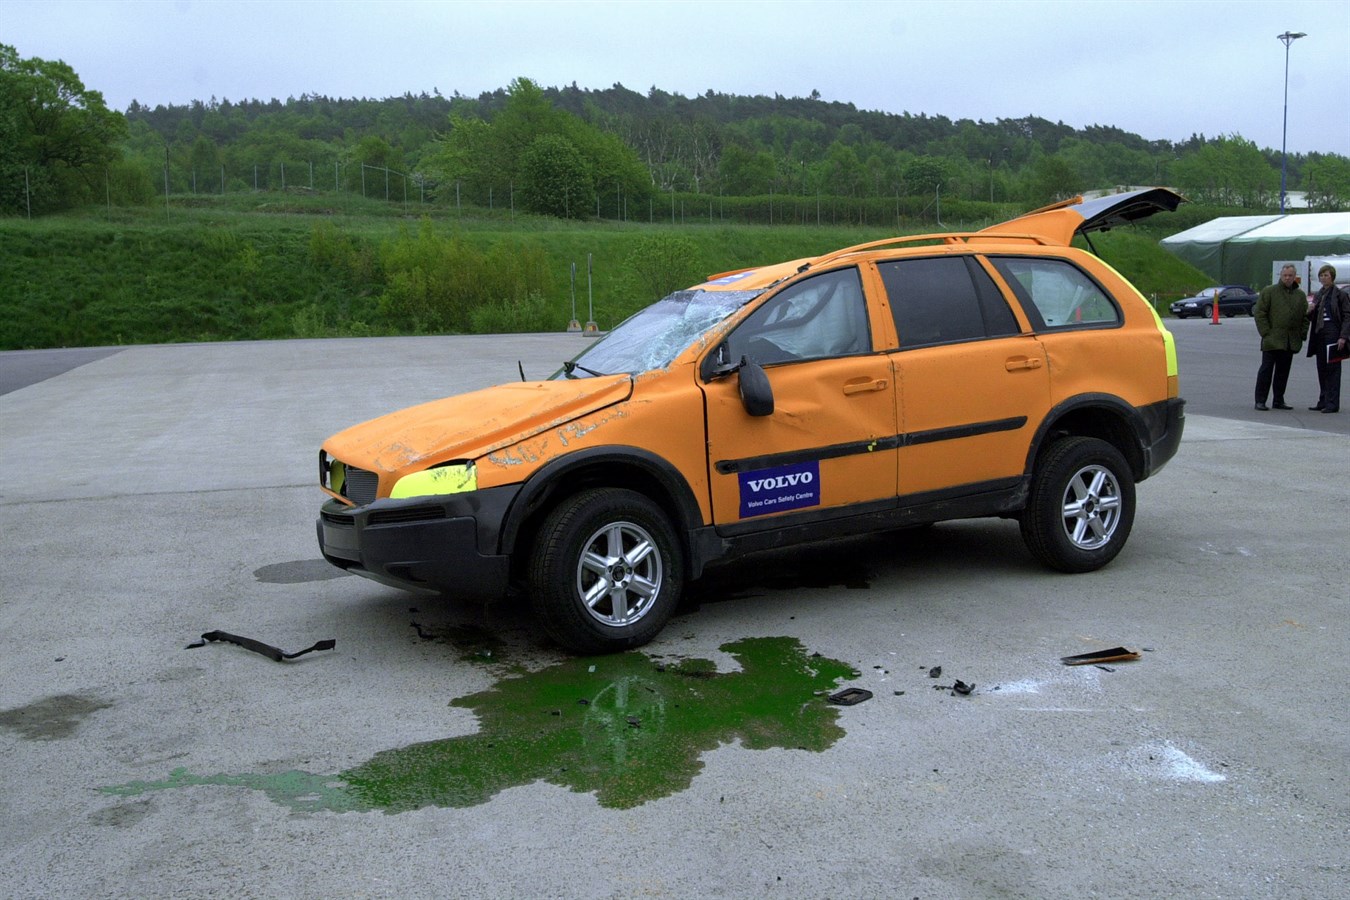 XC90, Roll over test